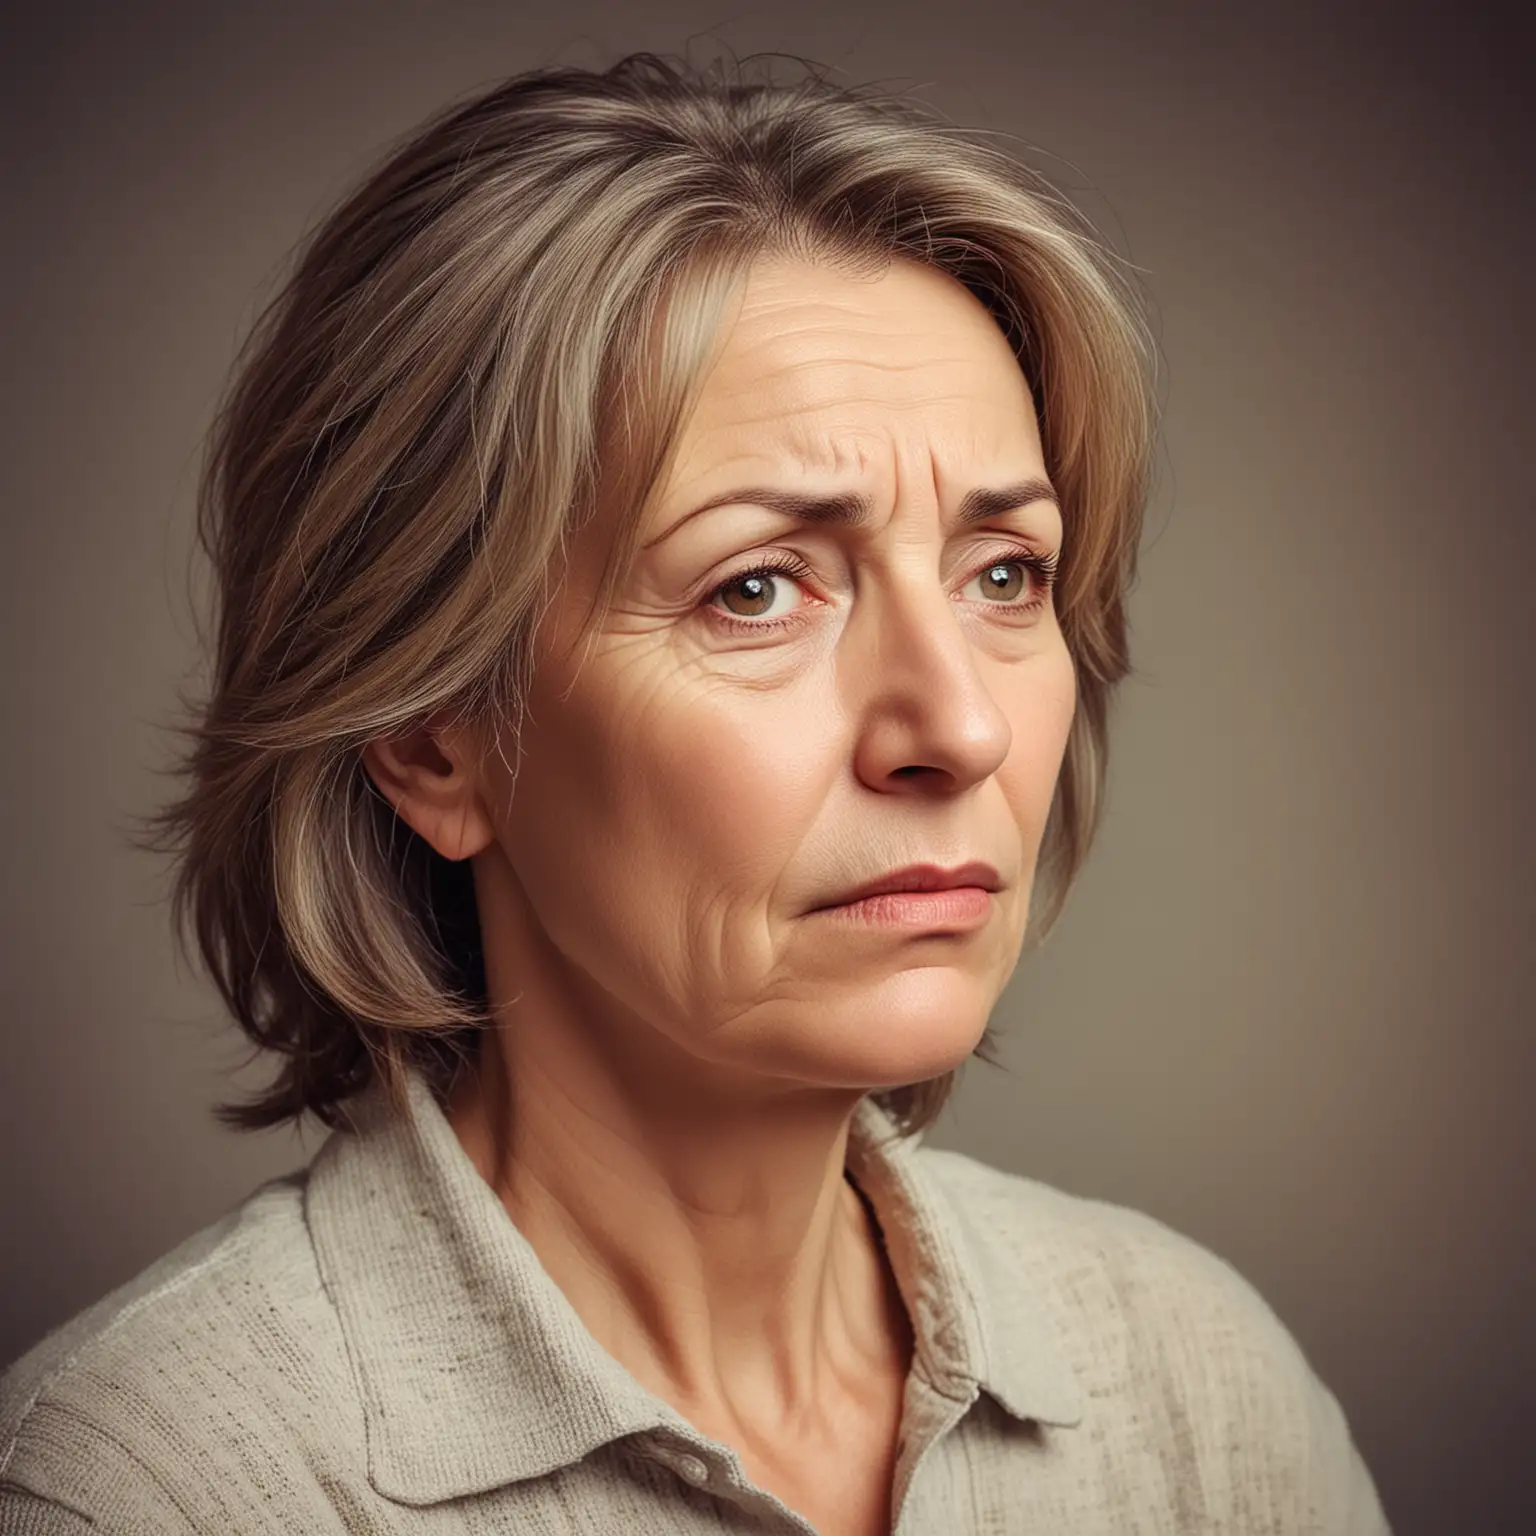 Profile picture. A naive mother in her fifties. She doesn’t not know what he son is capable of. She looks sad.